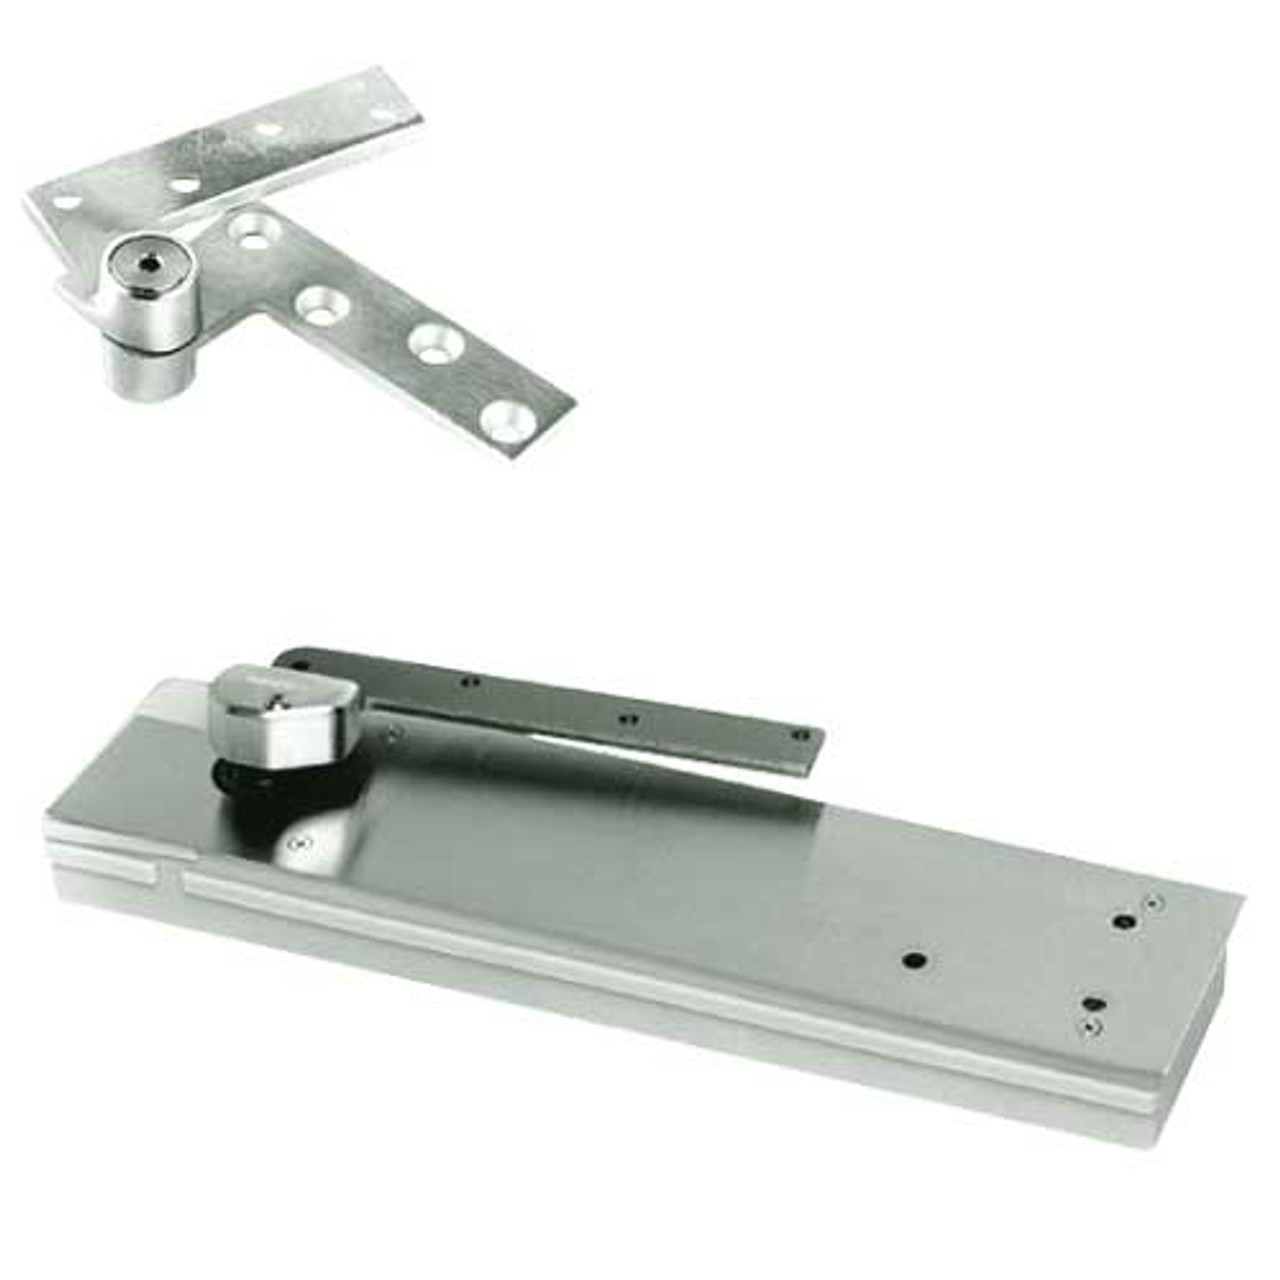 5103ABC105-1-1/2OS-LFP-LTP-RH-618 Rixson 51 Series 1-1/2" Offset Hung Shallow Depth Floor Closers in Bright Nickel Finish